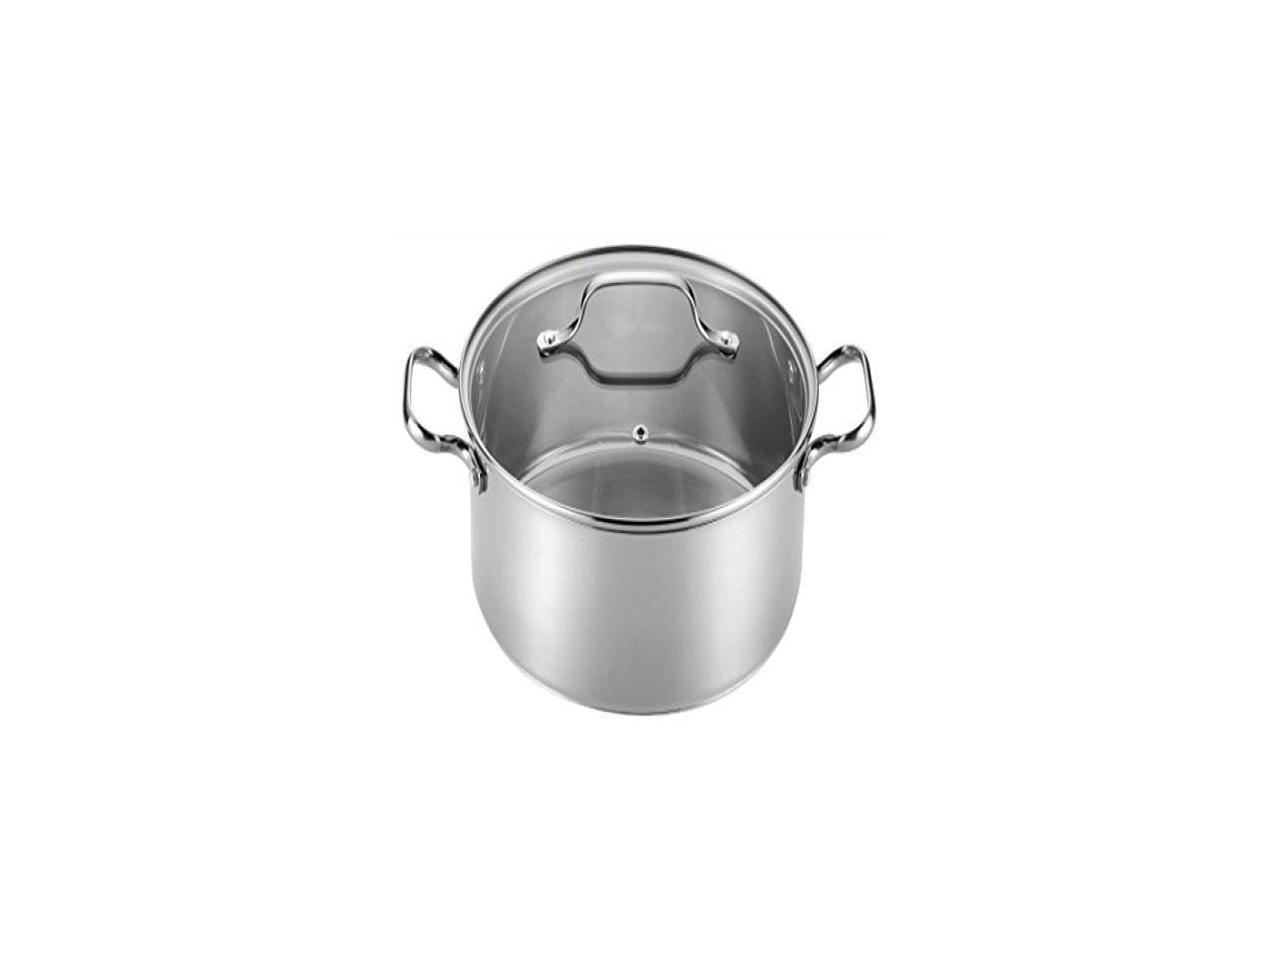 T-fal E75846 Performa Stainless Steel Dishwasher Safe Induction T Fal Induction Stainless Steel